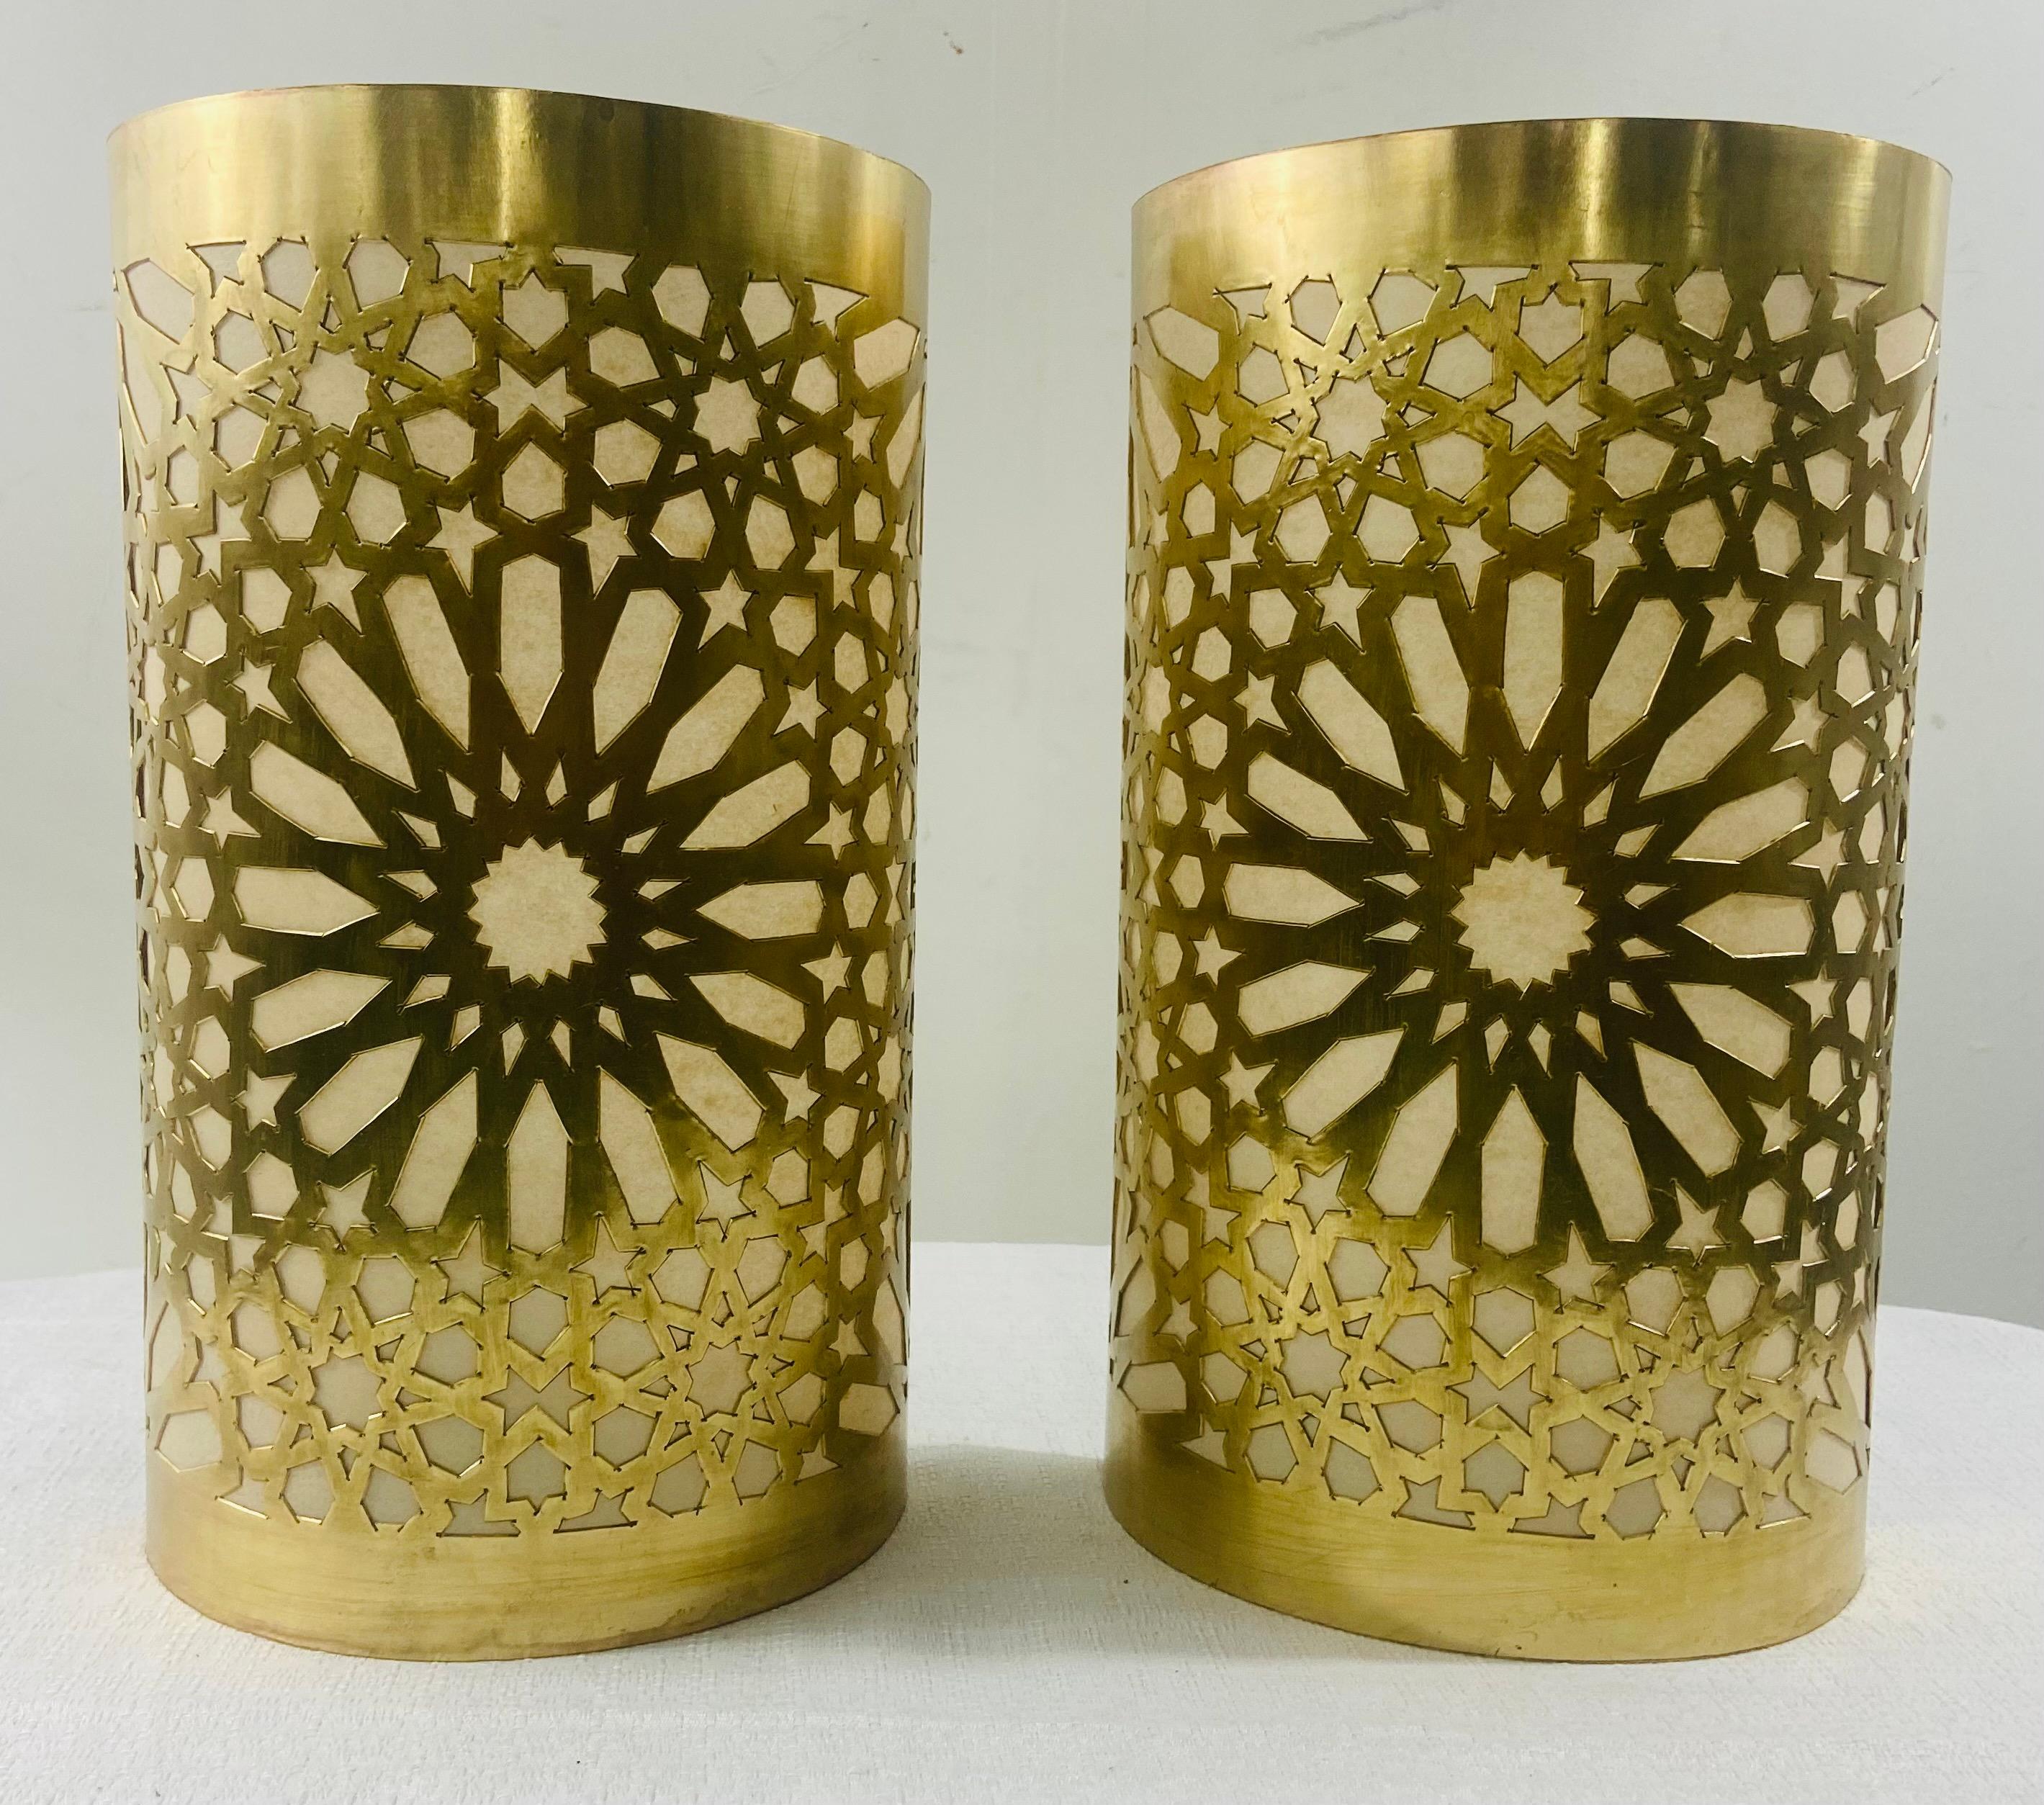 A stylish pair of Boho Chic Moroccan style sconces or wall lanterns. The wall sconces are finely handmade of high quality brass featuring a large floral design in the center and geometrical motifs enabling the creation of a cozy and fun lighting